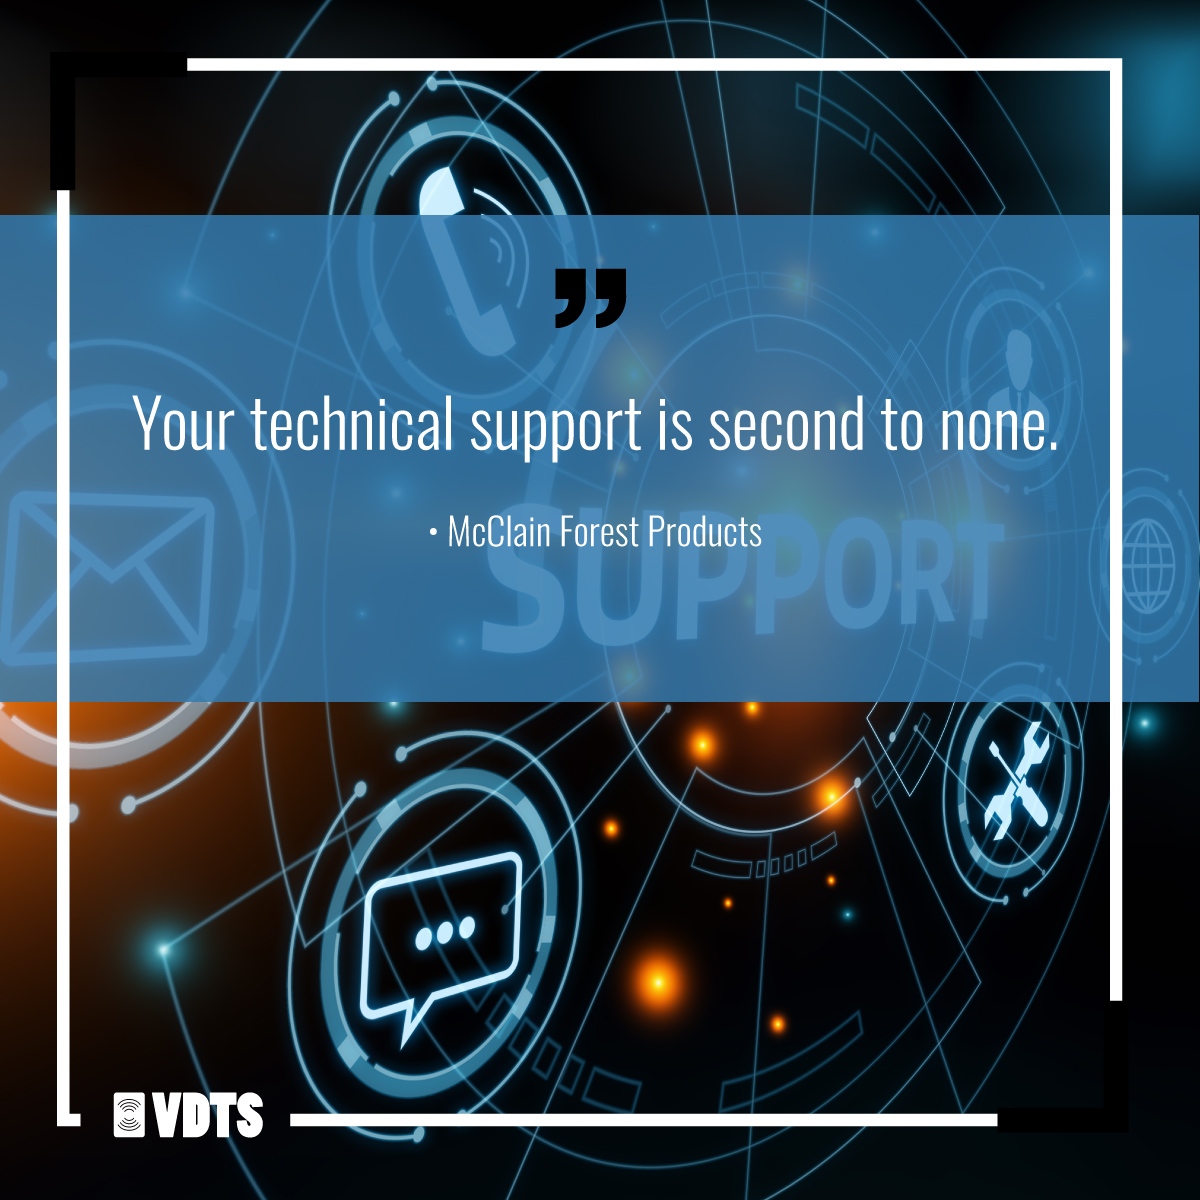 We LOVE hearing our client's feedback! Comment below if you've used the VDTS System at your workplace! 

#Freeyourhands #AssistedReality #datacollection #handsfree #voicetechnology #wireless #connected #connectedworker #realwear #wearabletechnology